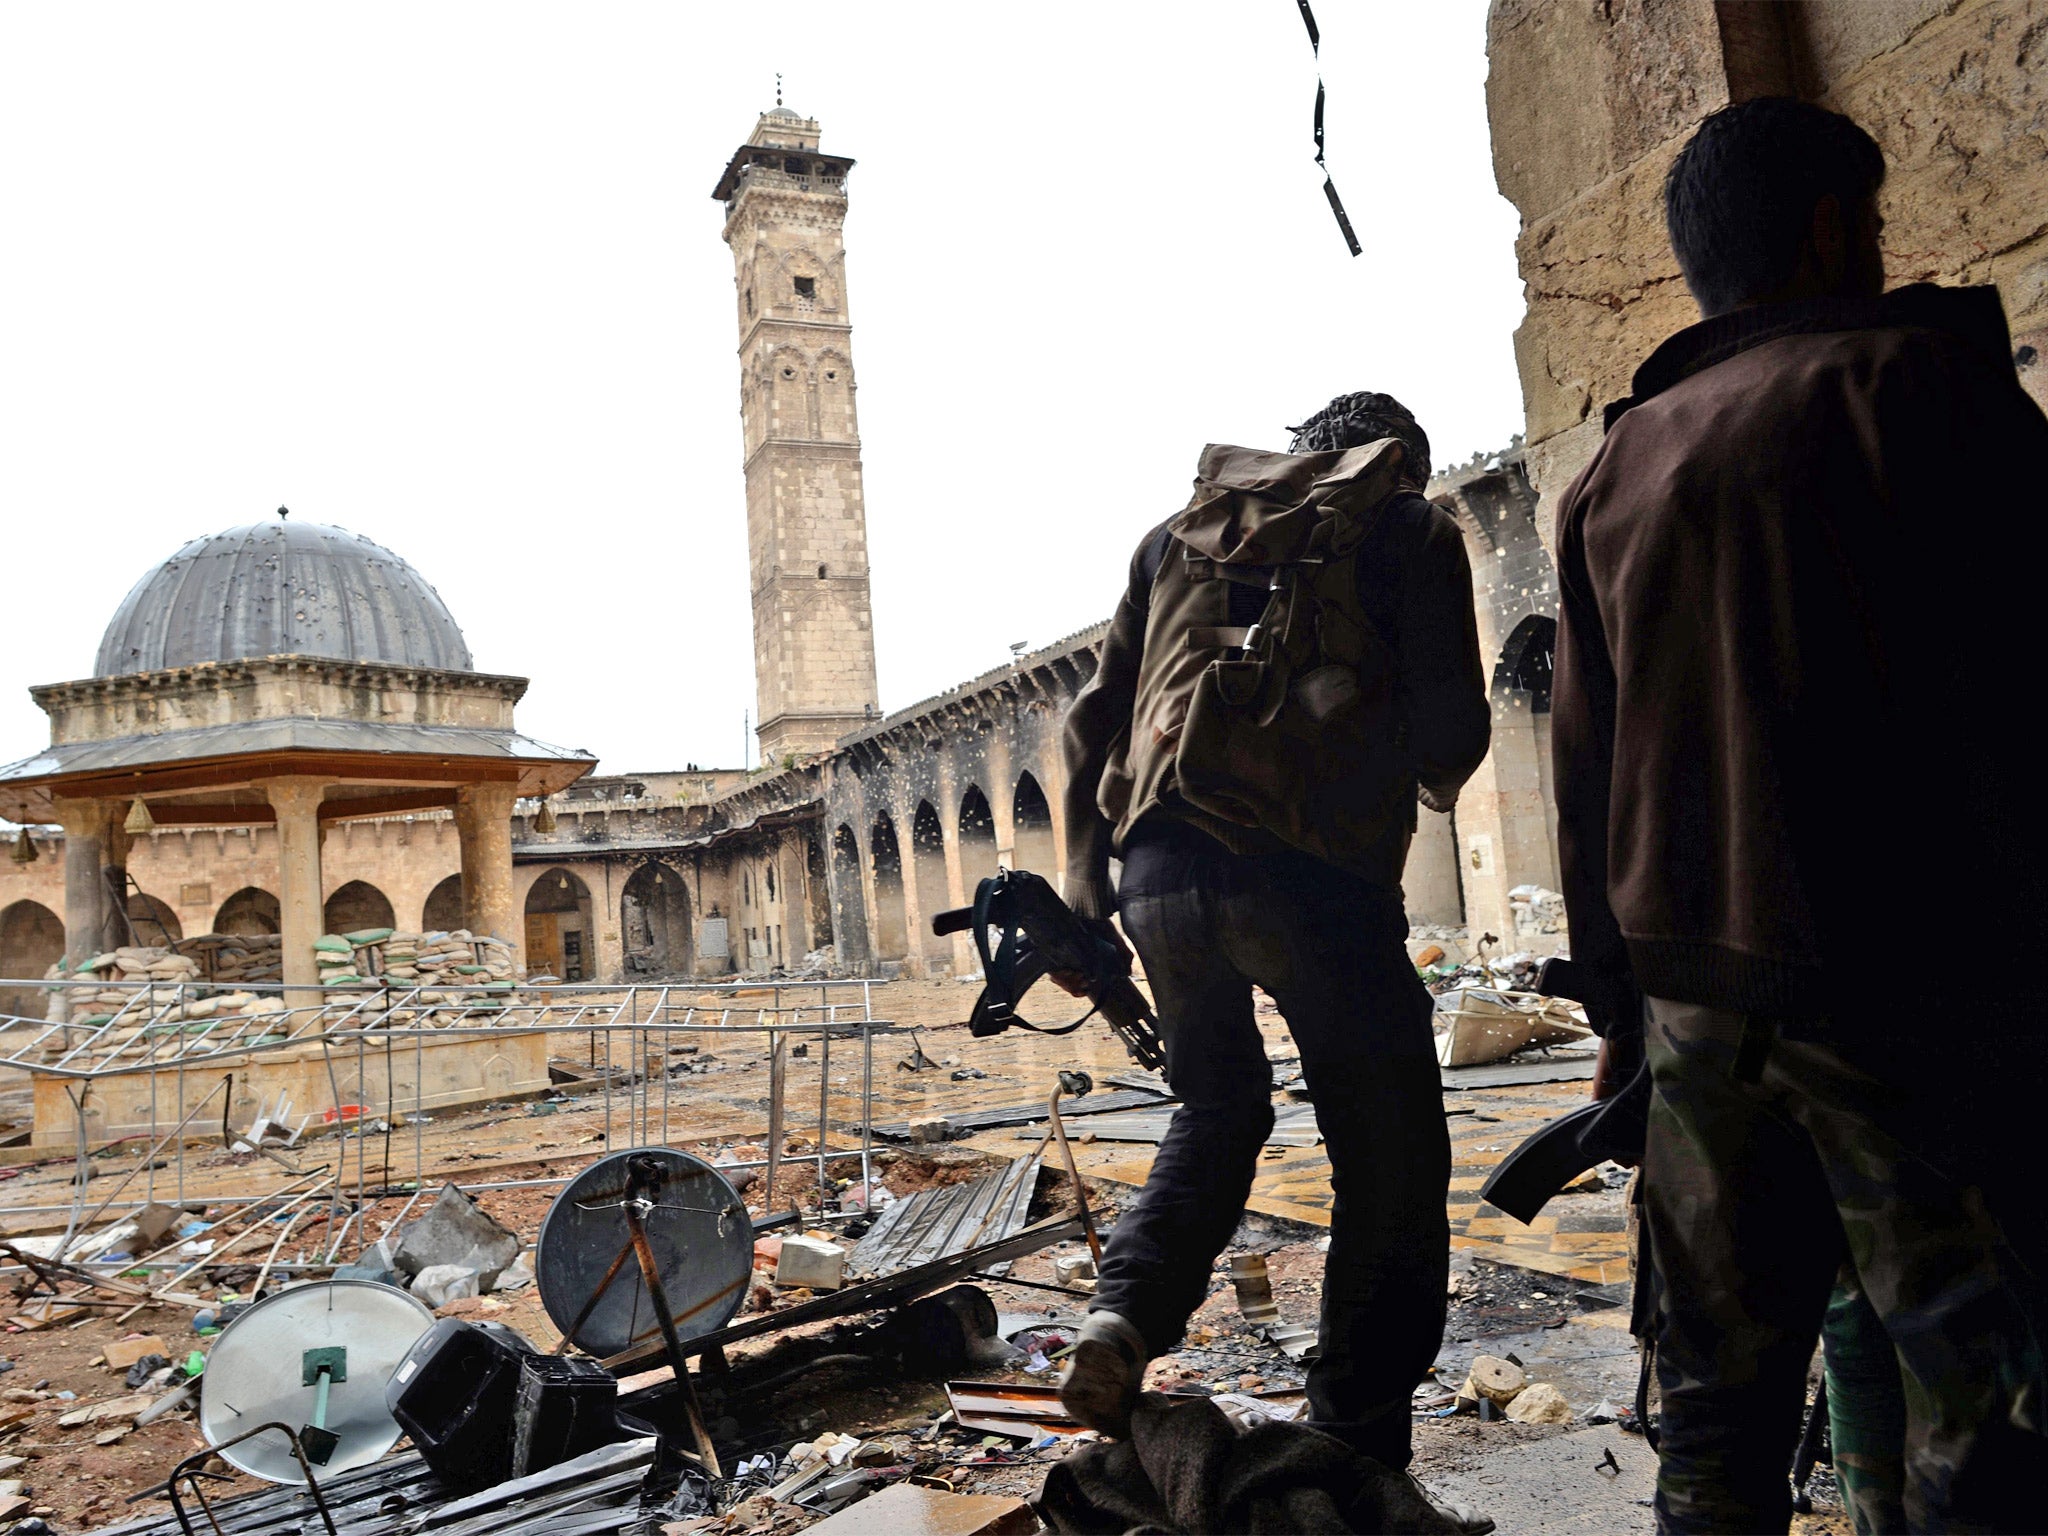 It is estimated that between 500 at 600 Europeans are in Syria fighting with the rebels